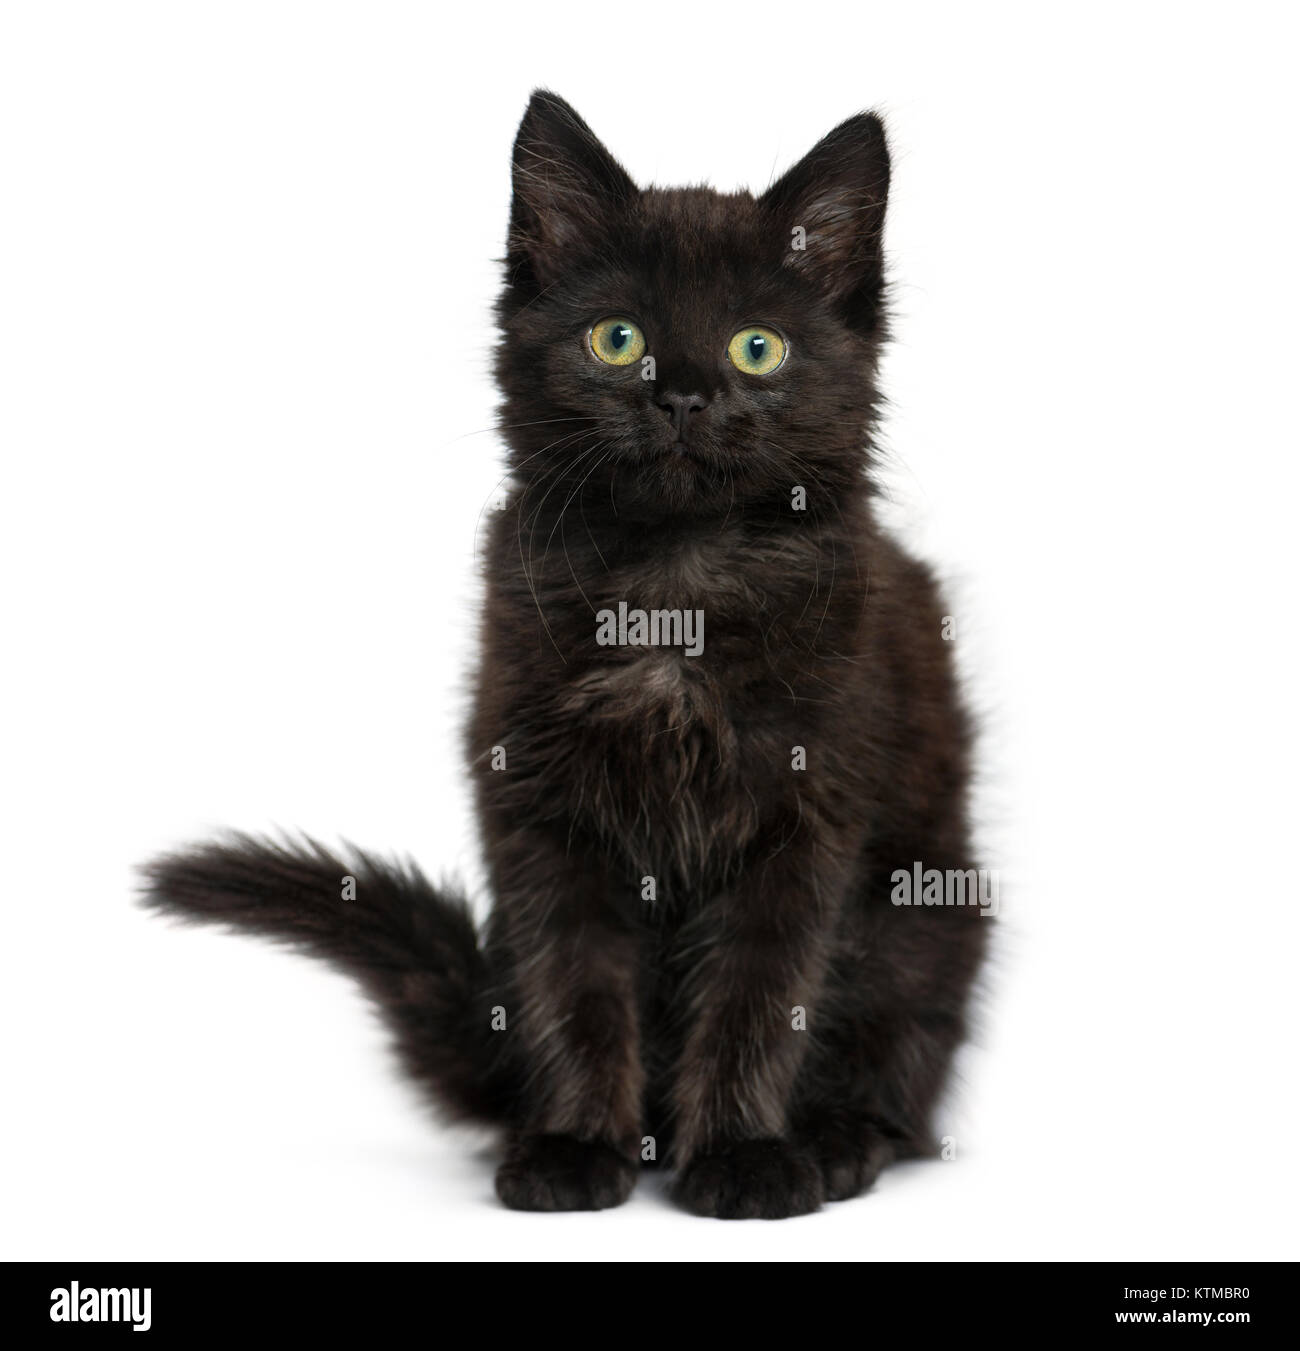 Black cat kitten sitting and looking at the camera, isolated on white Stock Photo